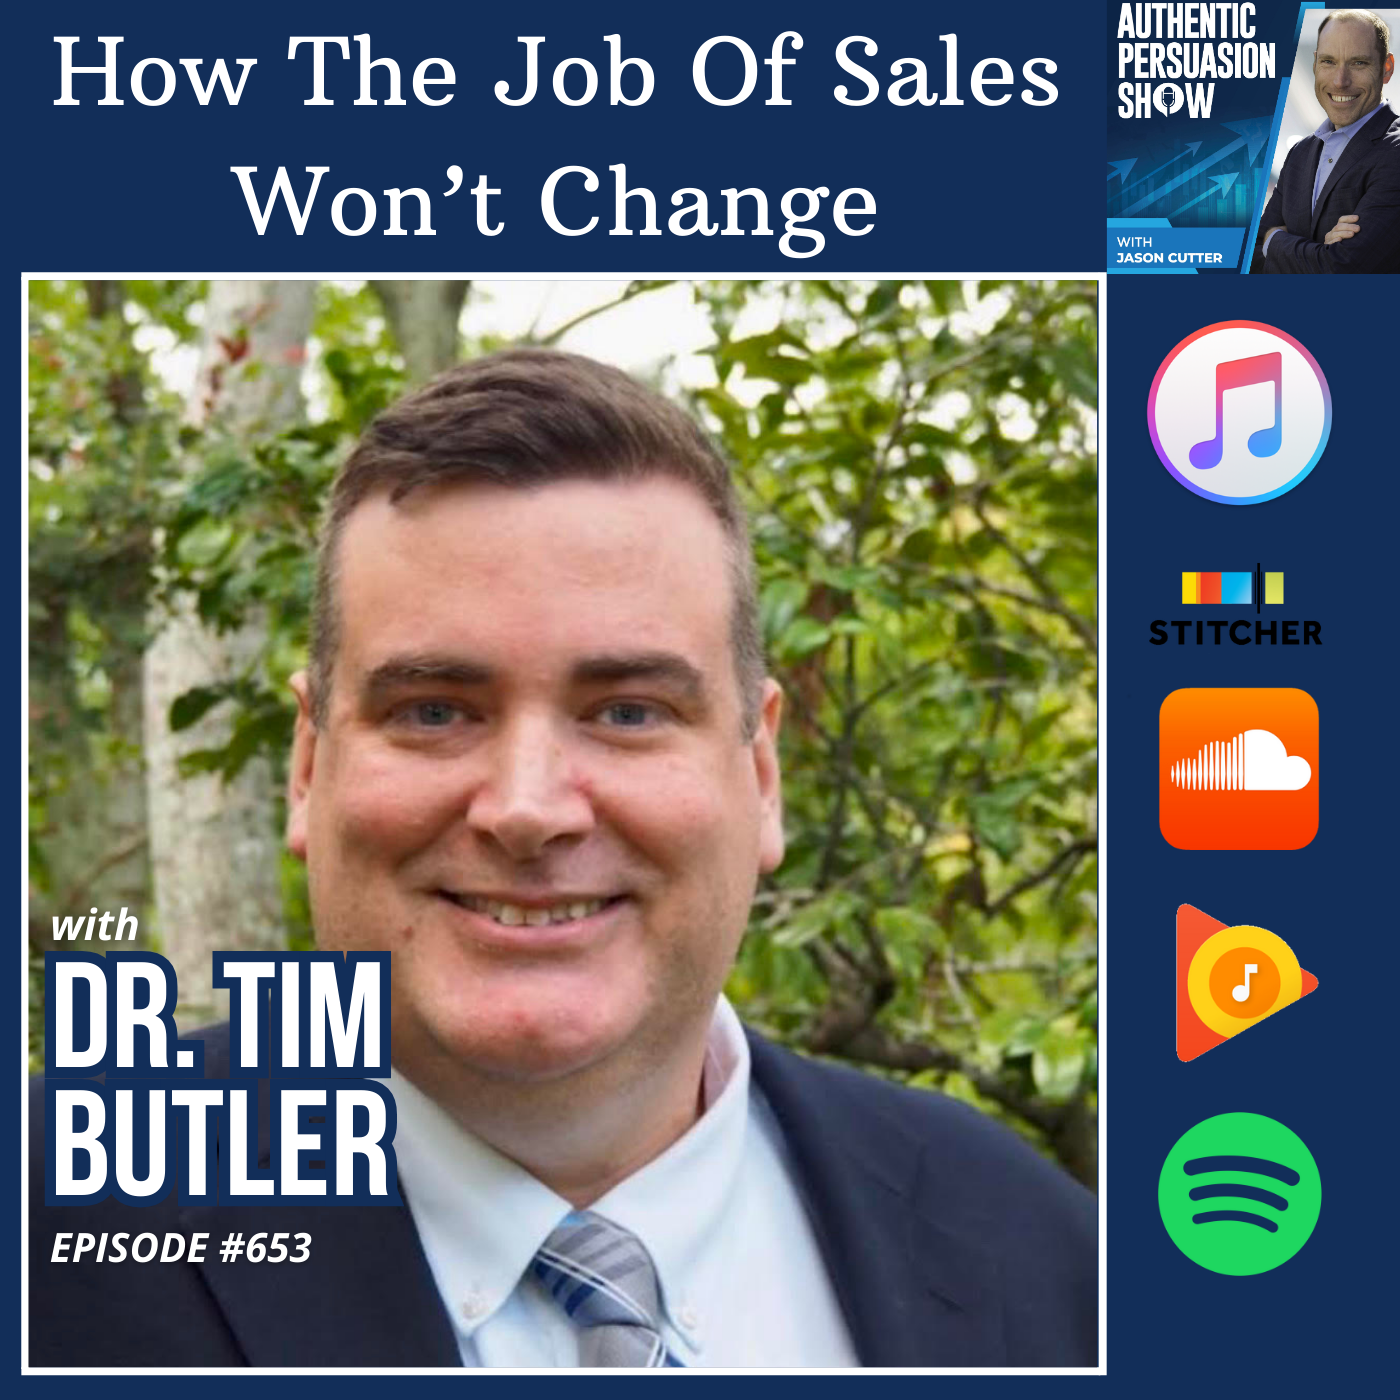 [653] How The Job Of Sales Wont Change, but the Job Description Will, with Dr. Tim Butler from Southeastern Louisiana University